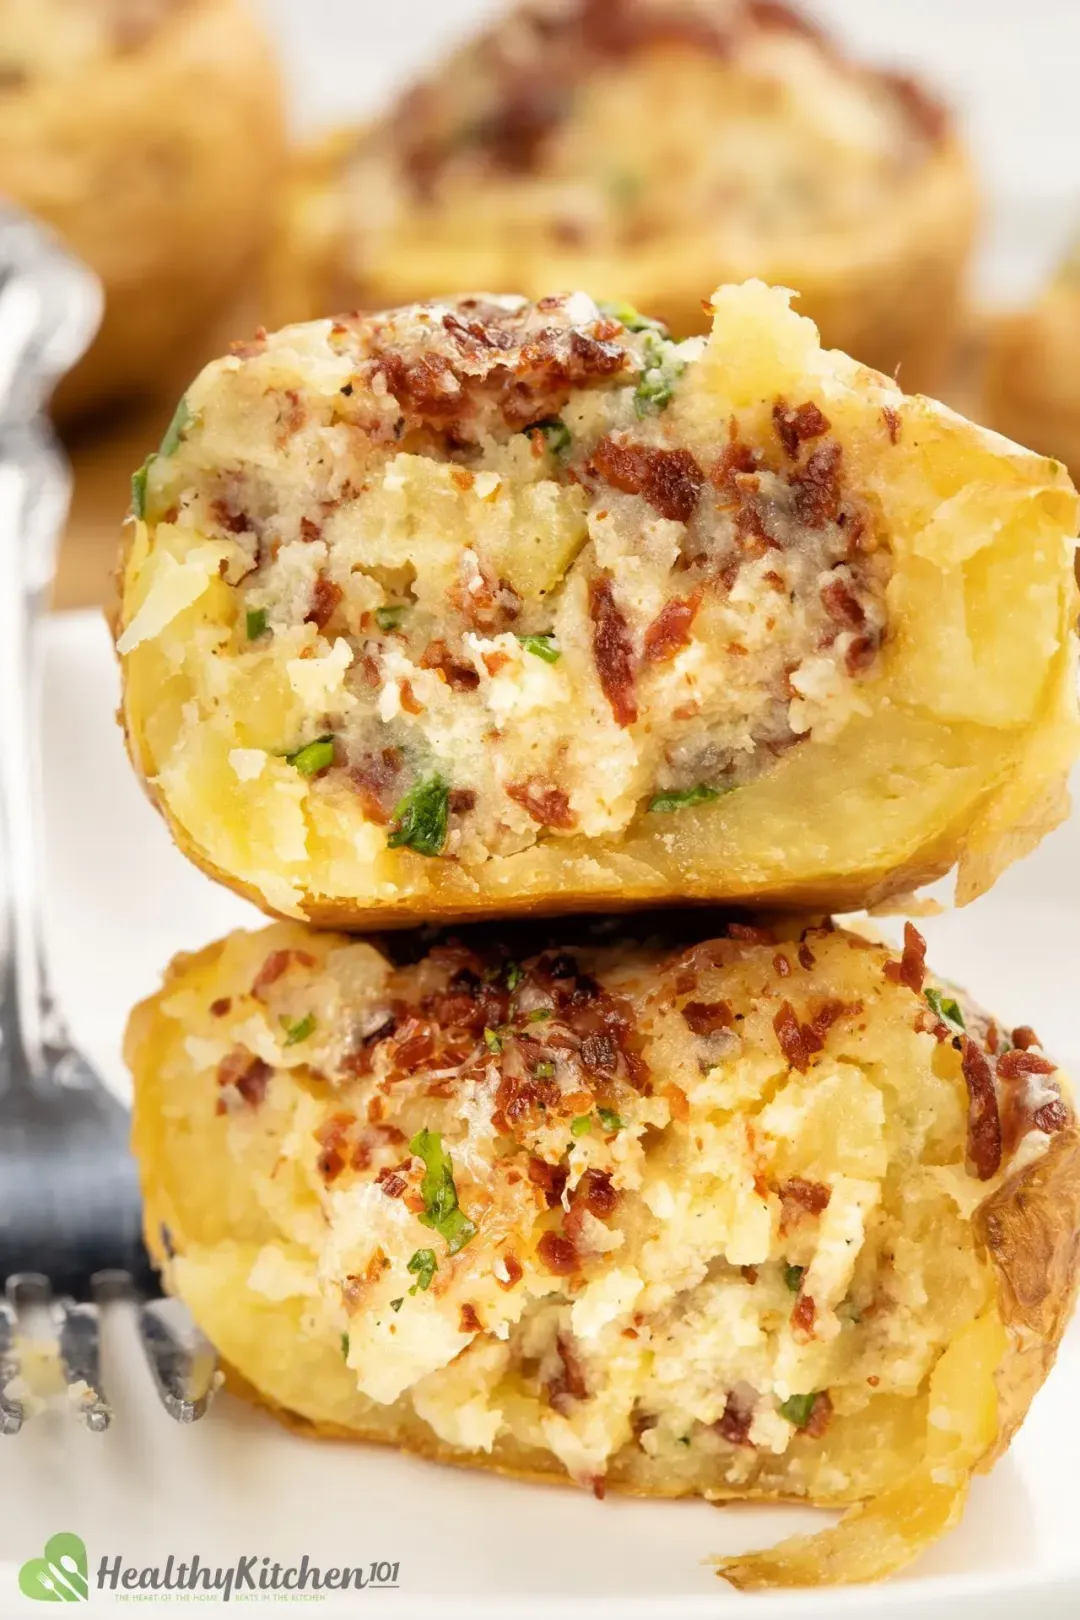 Toppings for Baked Potatoes Recipe